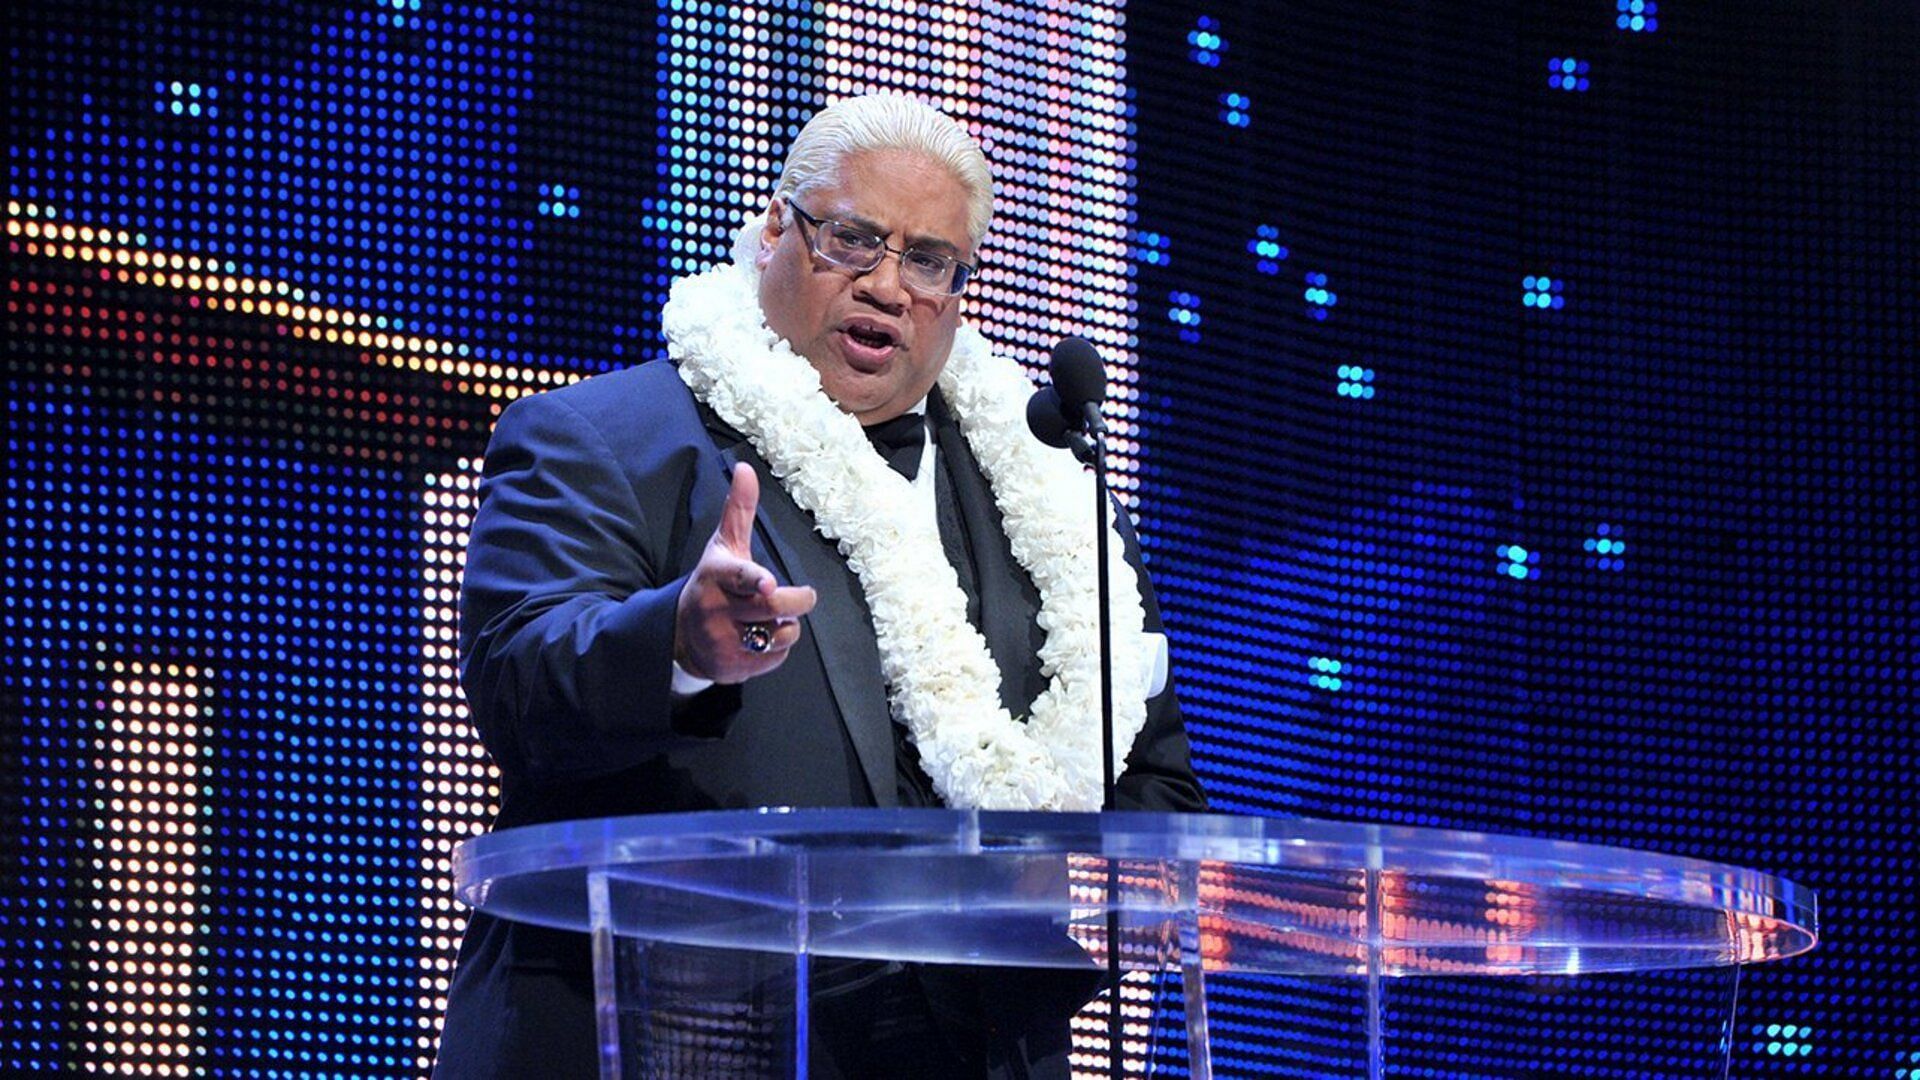 Rikishi is inducted into the WWE Hall of Fame